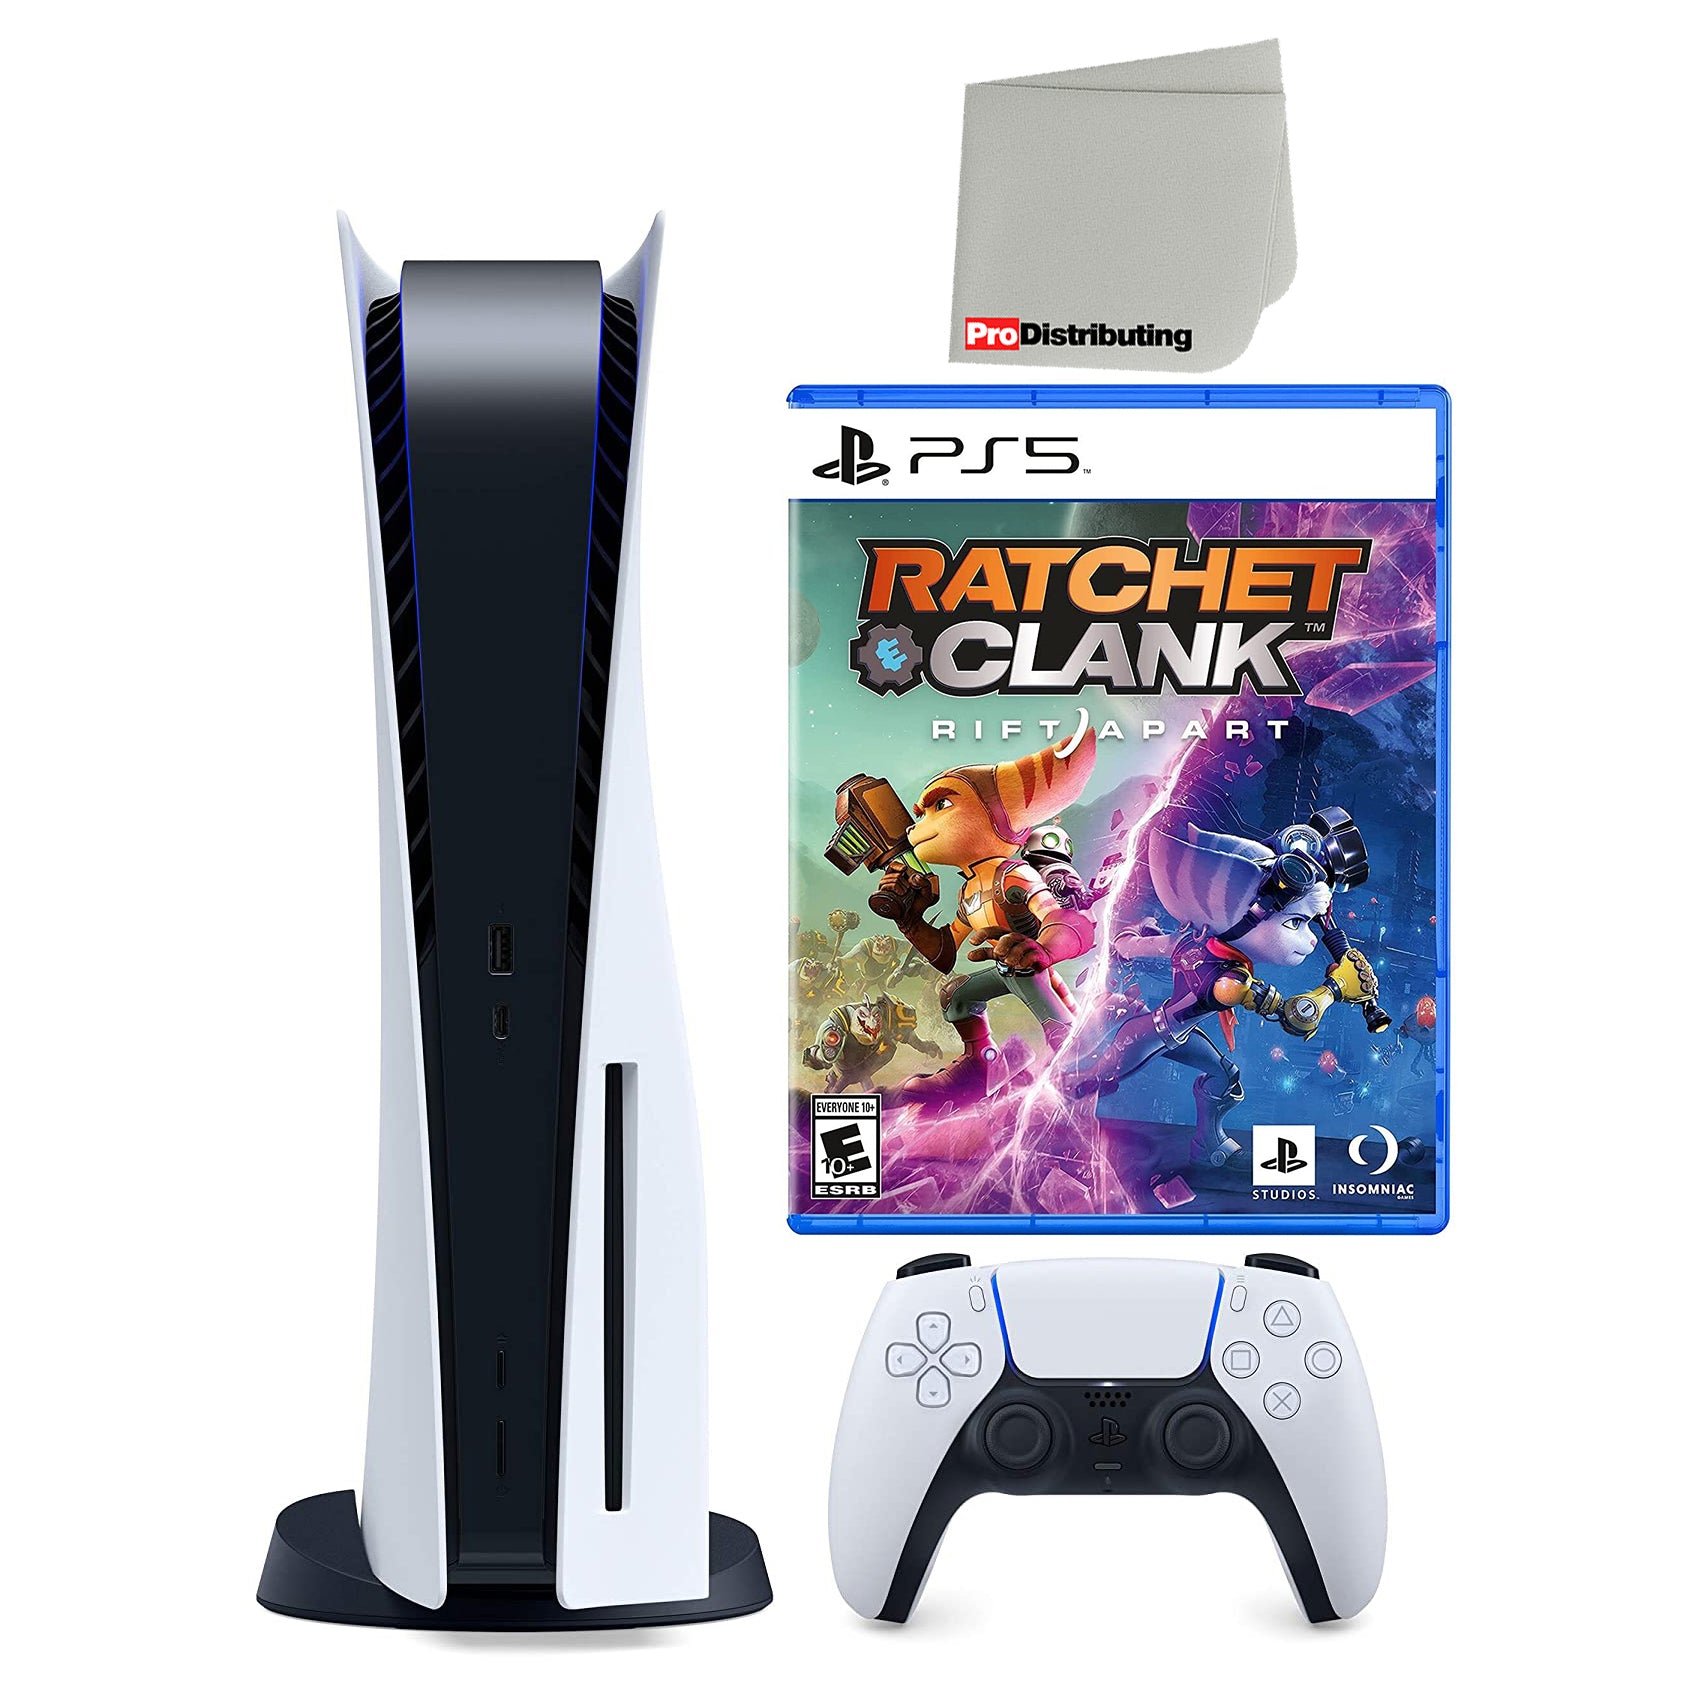 Sony Playstation 5 Disc Version with Ratchet & Clank: Rift Apart Bundle with Microfiber Cleaning Cloth - Pro-Distributing